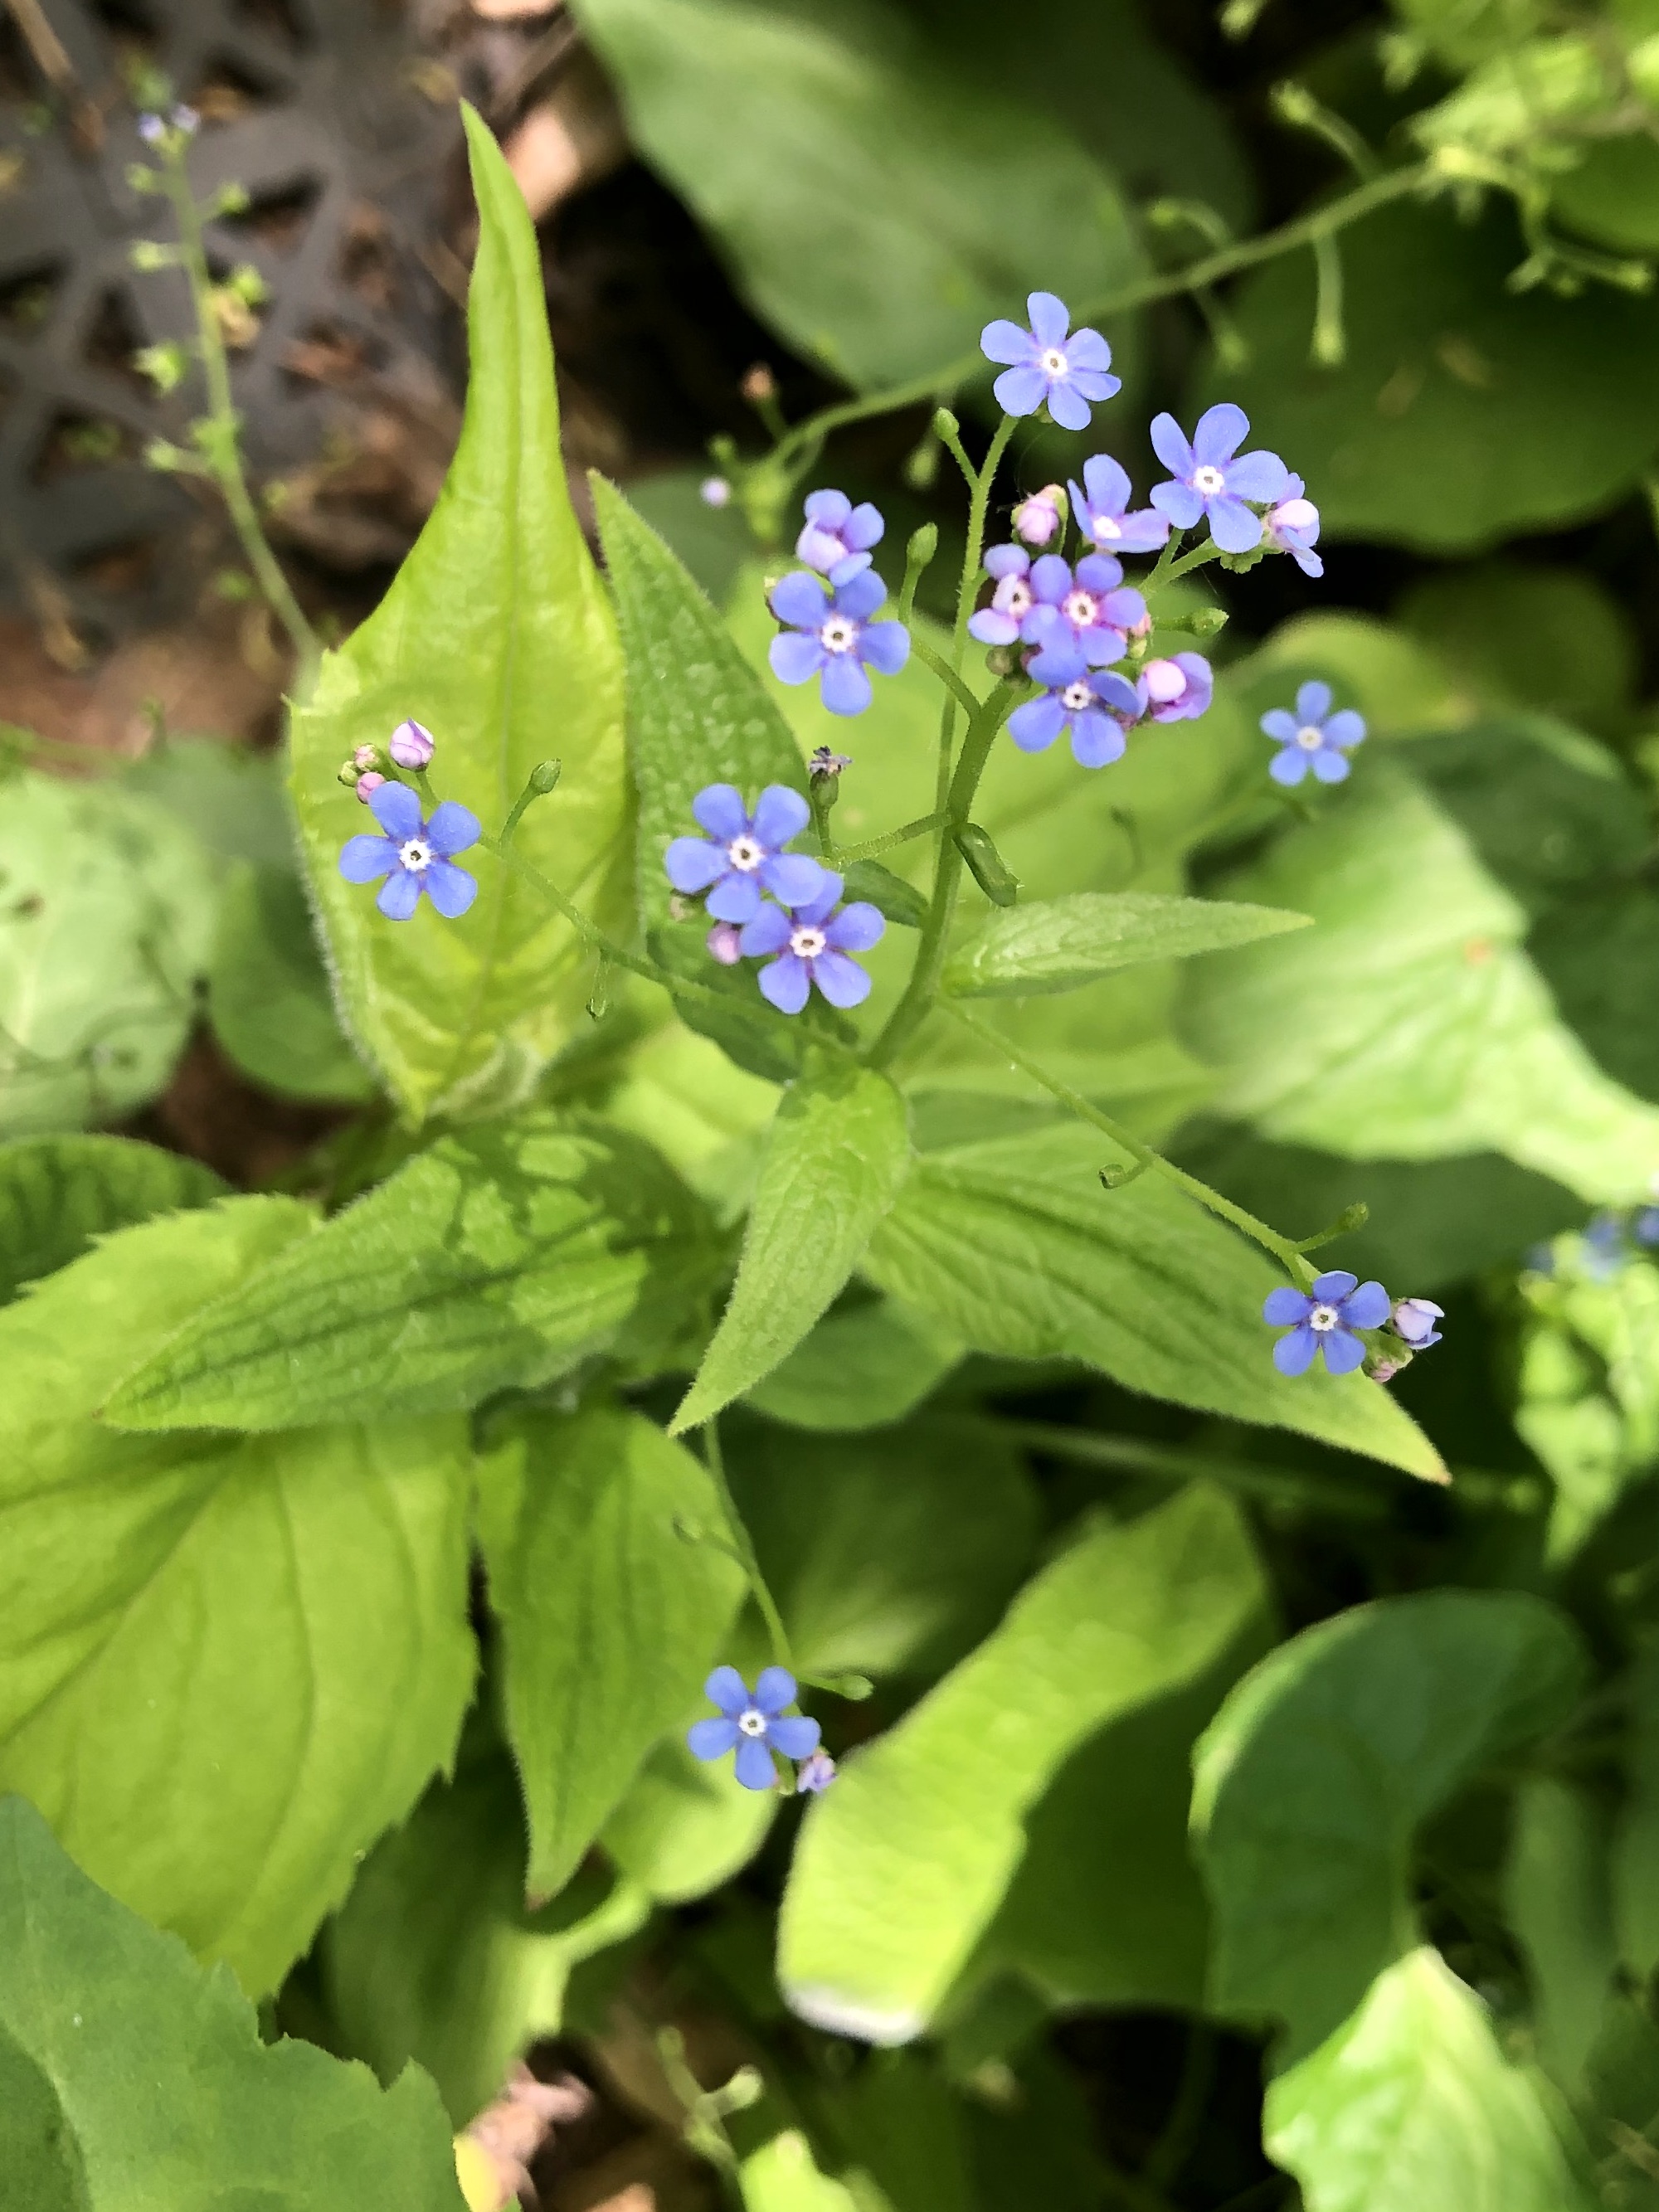 False Forget-Me-Not in the Thoreau Rain Garden in Madison, Wisconsin on May 122, 2022